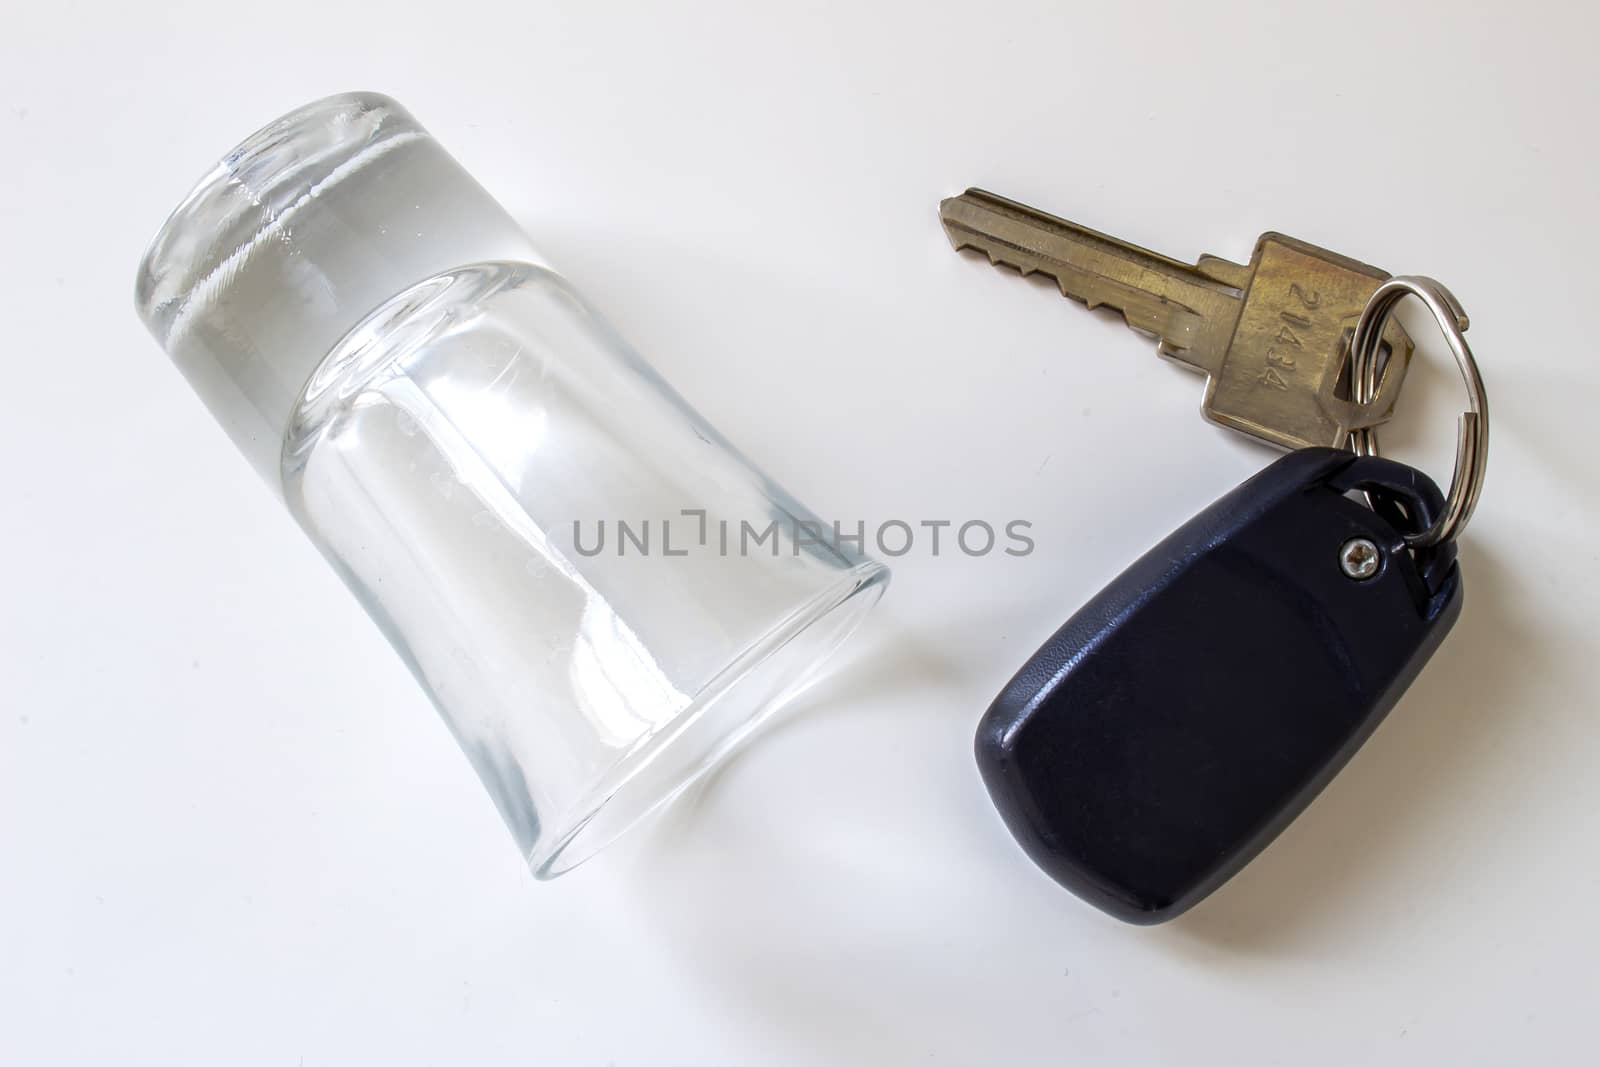 Don't drink and drive. An empty shot glass on a white background with car keys